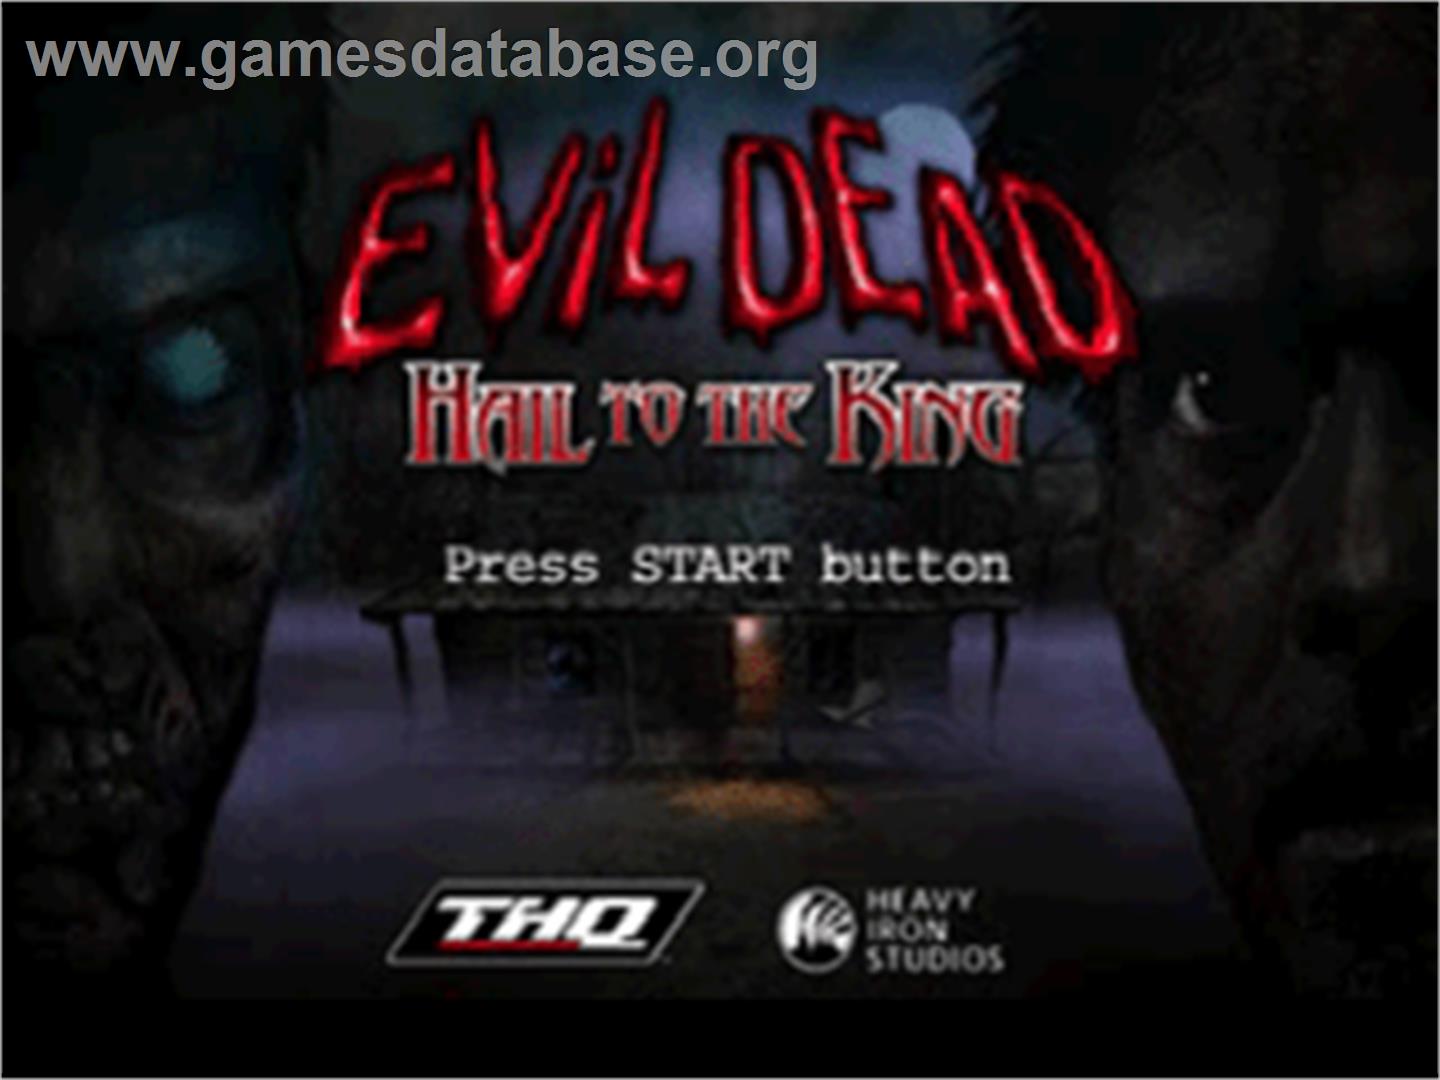 Evil Dead: Hail to the King - Sony Playstation - Artwork - Title Screen